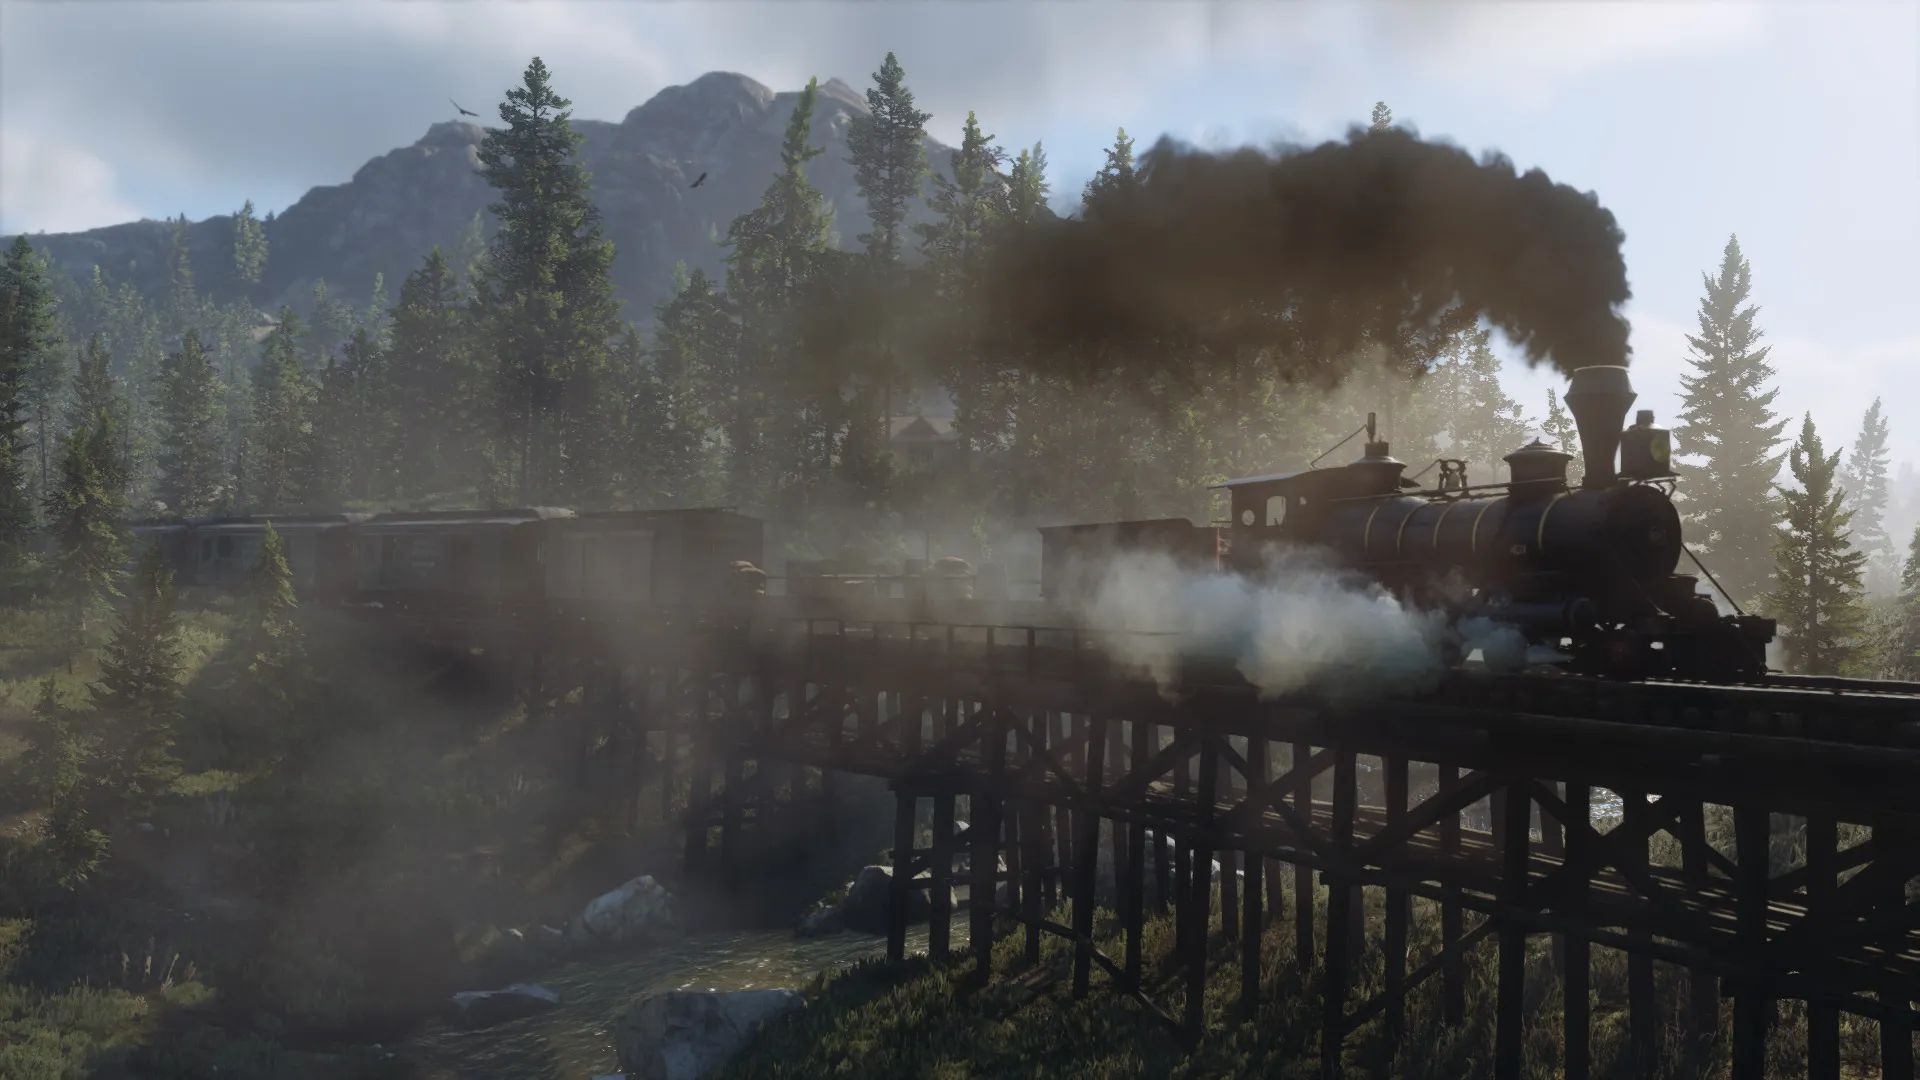 A steam train in Red Dead Redemption 2, making its way over a bridge